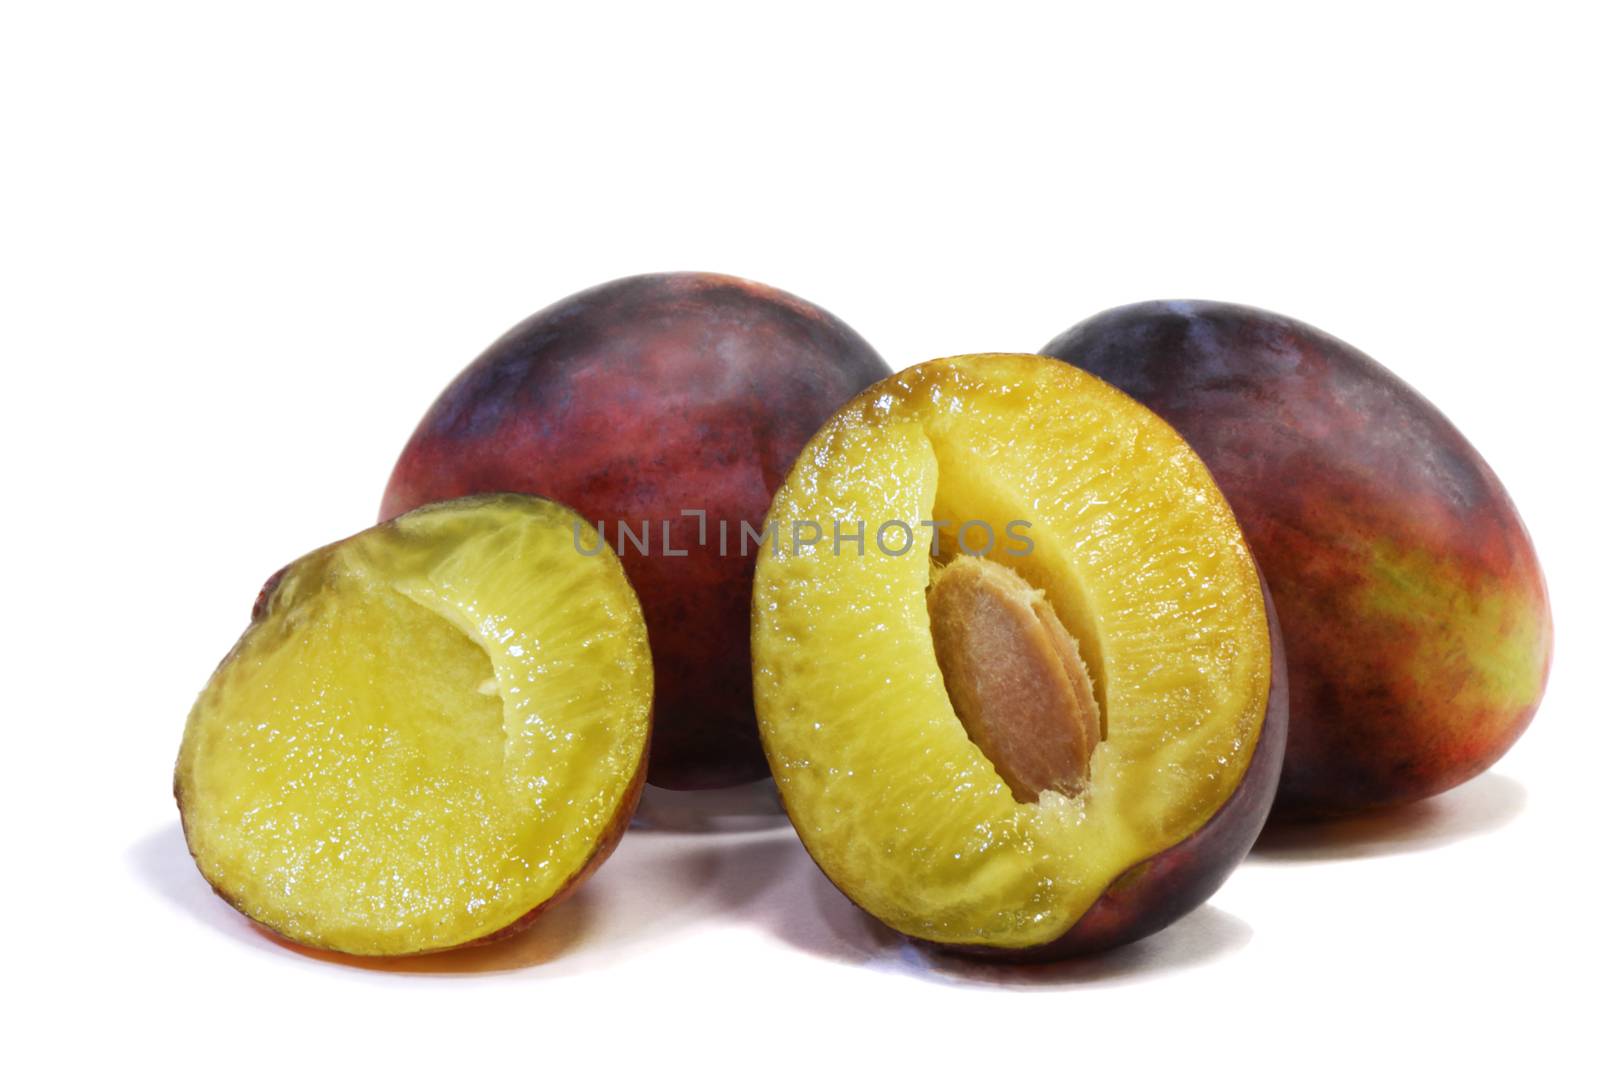 Large ripe plum and one exploded drain on white background